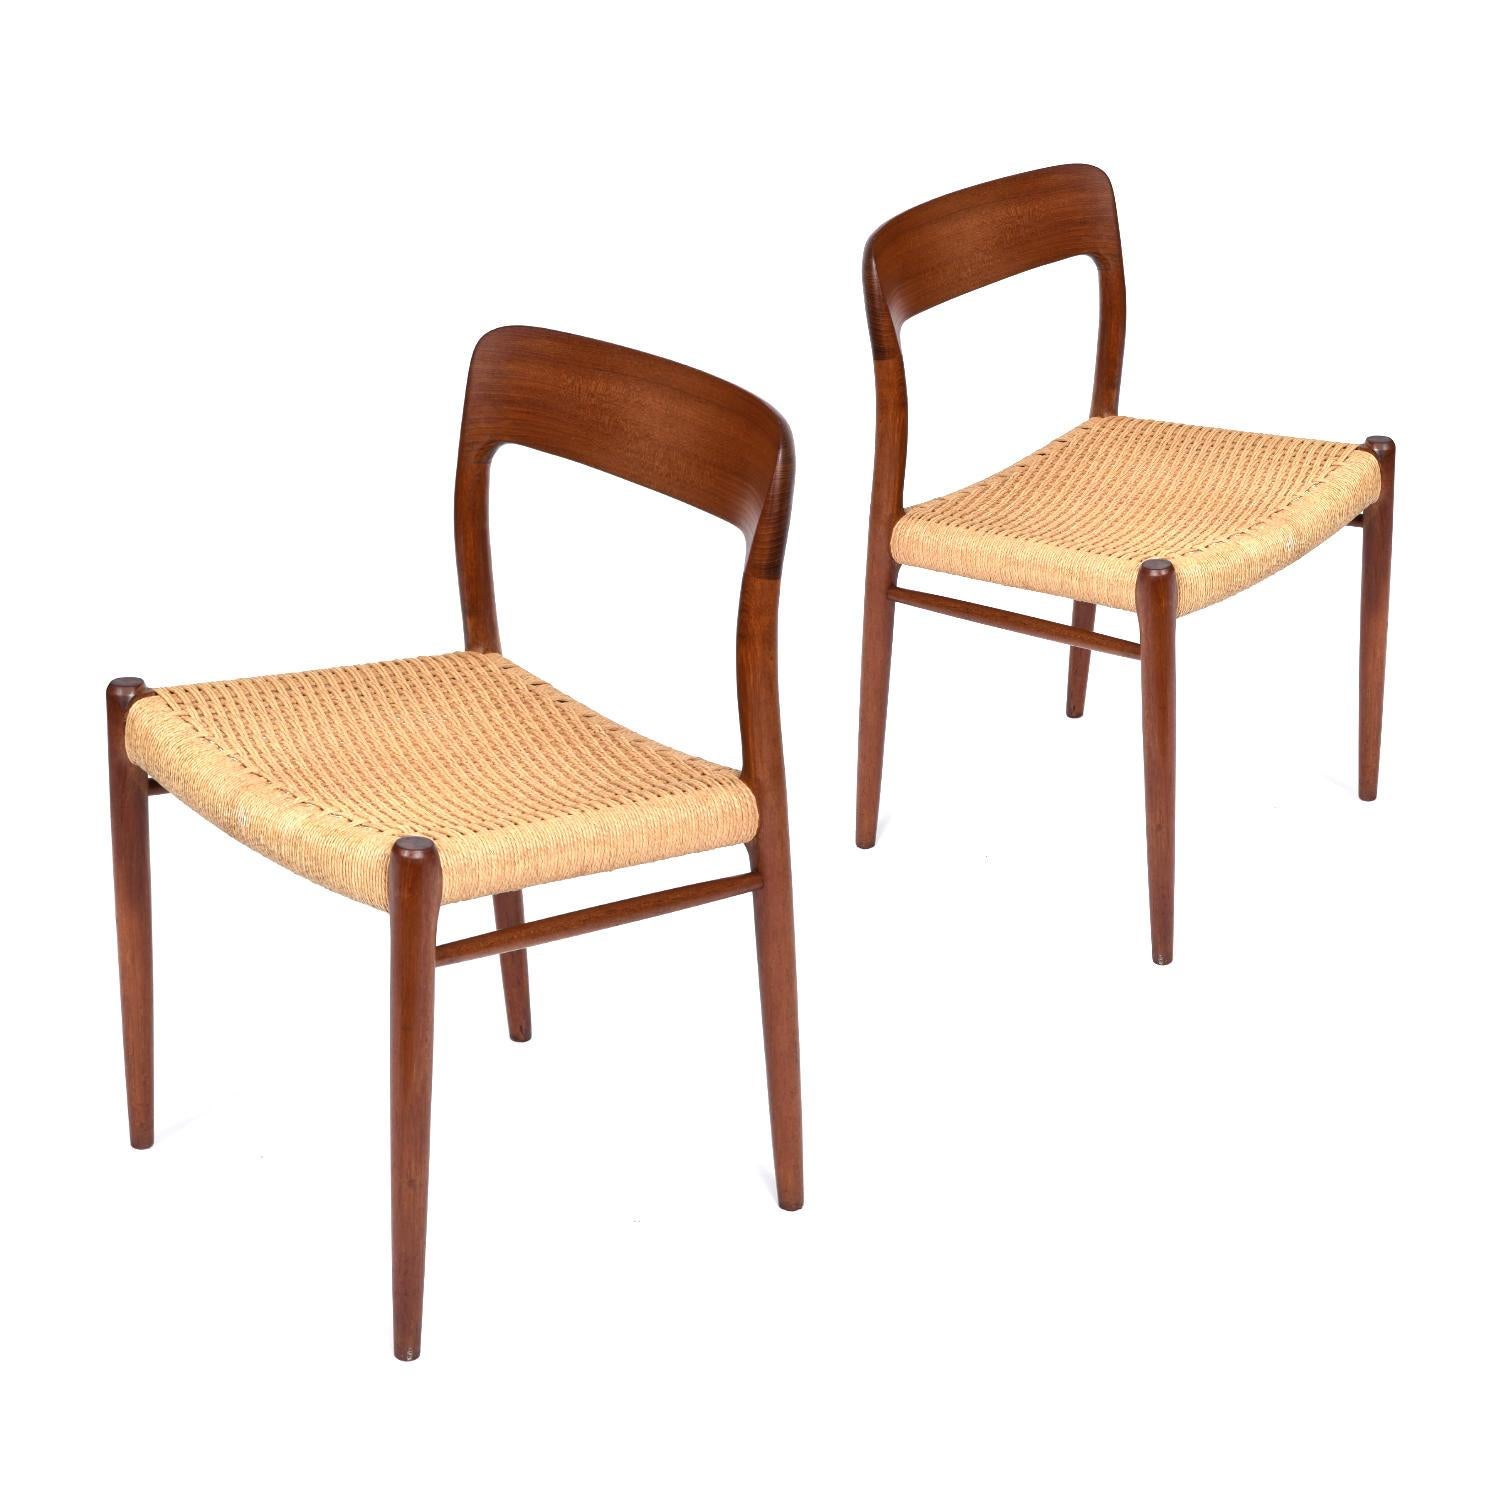 Eight Danish rope seat dining chairs by Niels Otto Moller. The classic roped seat chairs have become icons of Danish Modern design since their introduction by J.L. Moller. The set includes eight model 75 chairs. All of the chairs feature their